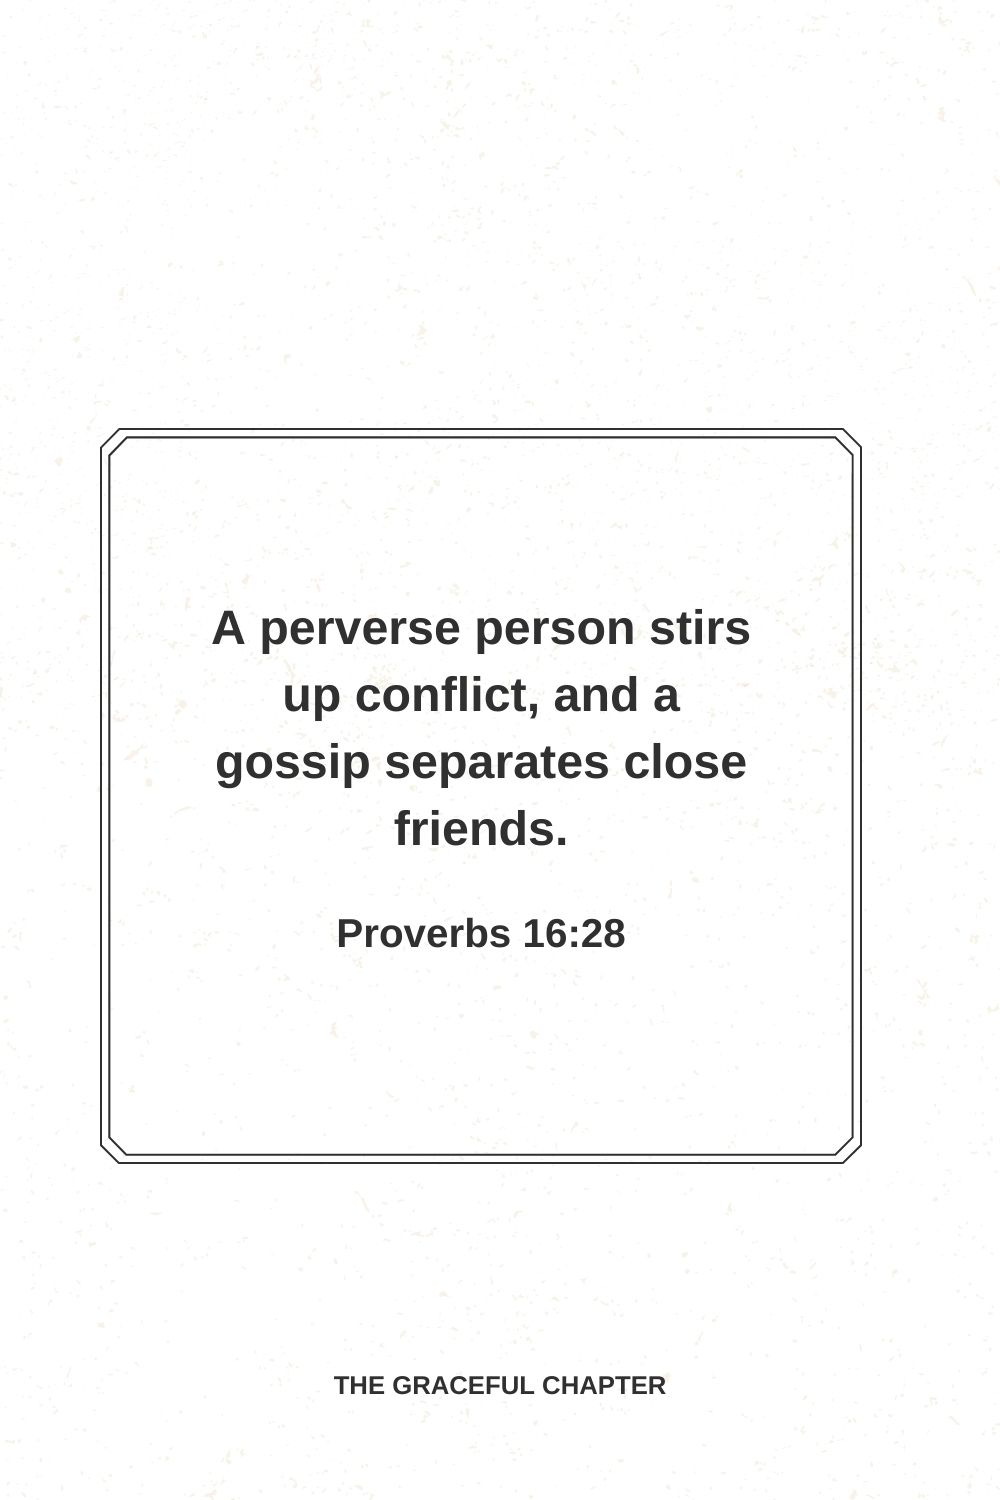 A perverse person stirs up conflict, and a gossip separates close friends. Proverbs 16:28